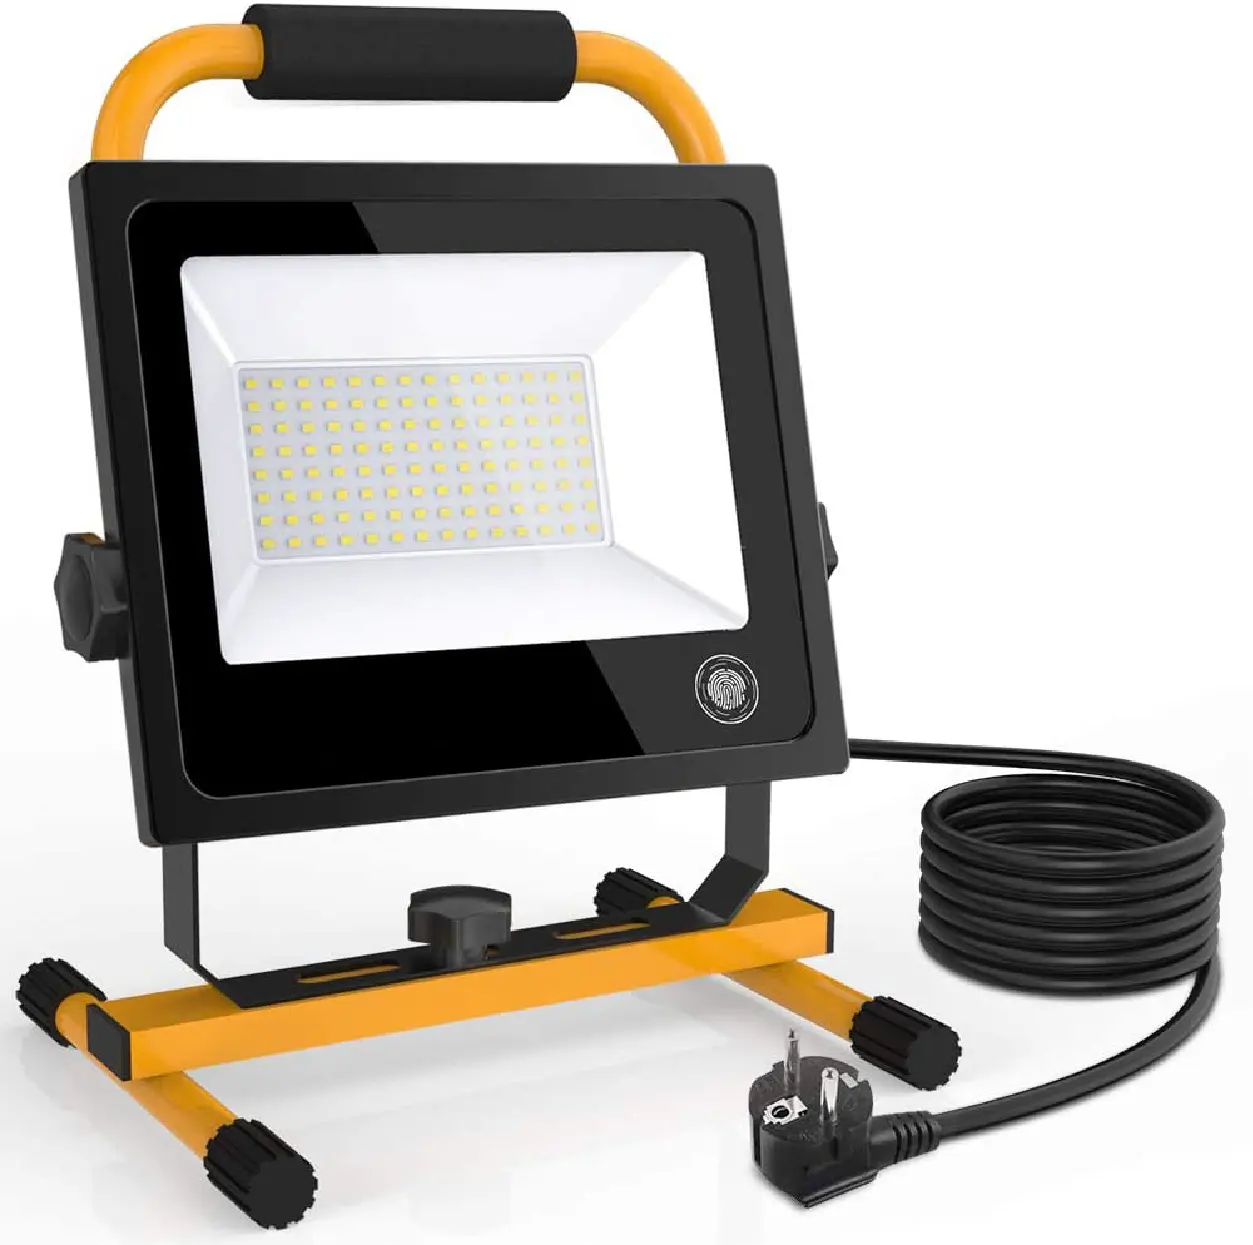 Led Emergency Floodlight Hand Lamp Outdoor Rechargeable LED Work Light